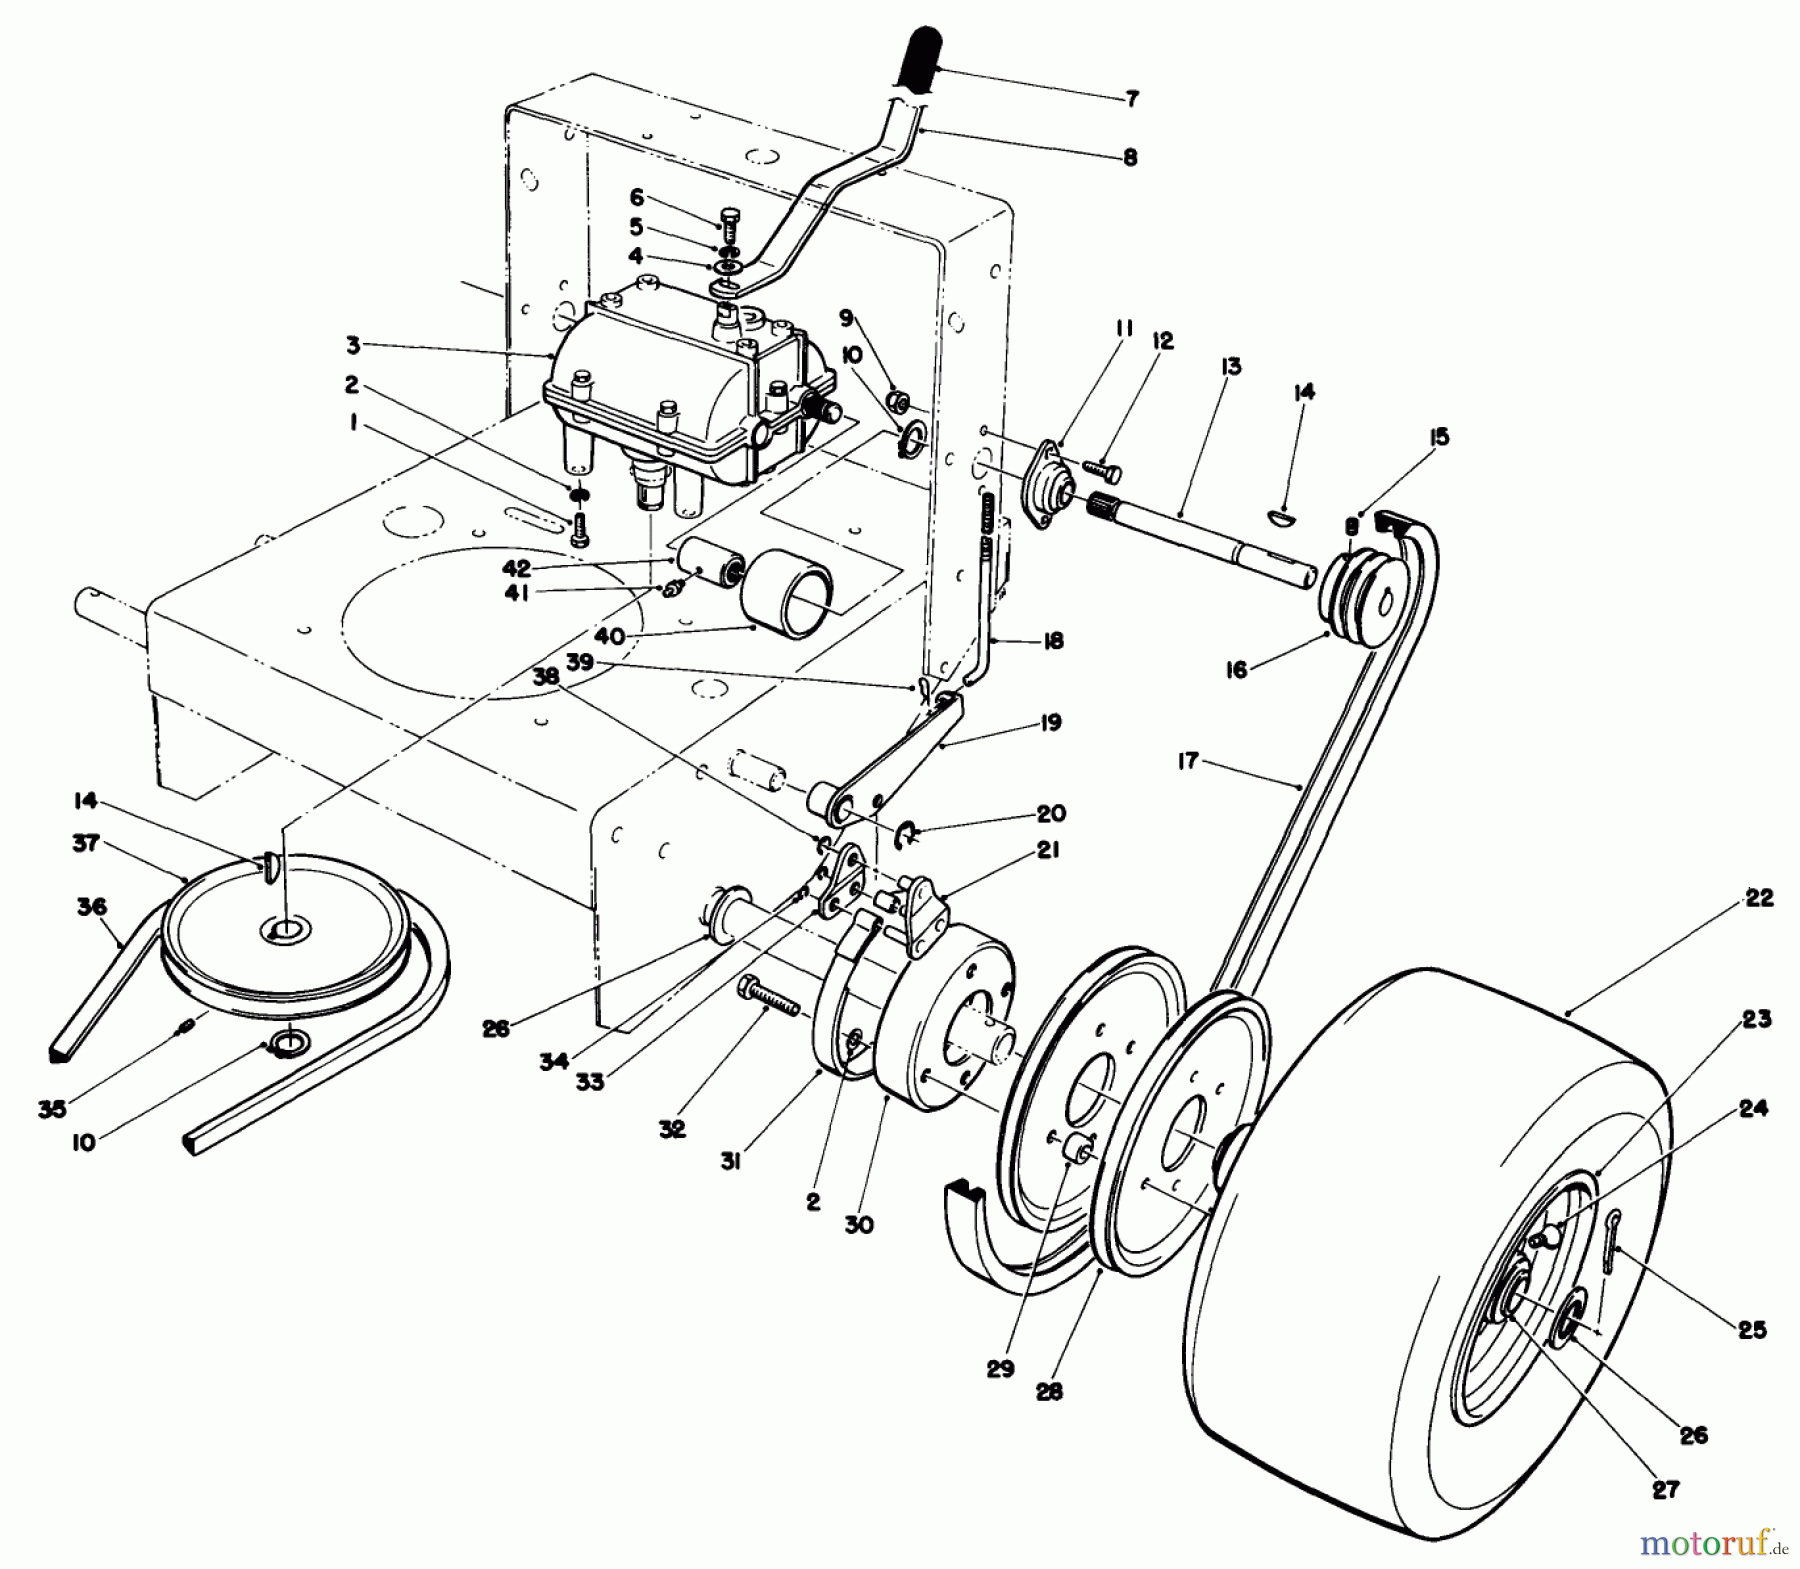  Toro Neu Mowers, Drive Unit Only 30112 - Toro Mid-Size Proline Gear Traction Unit, 12.5 hp, 1986 (6000001-6999999) AXLE ASSEMBLY